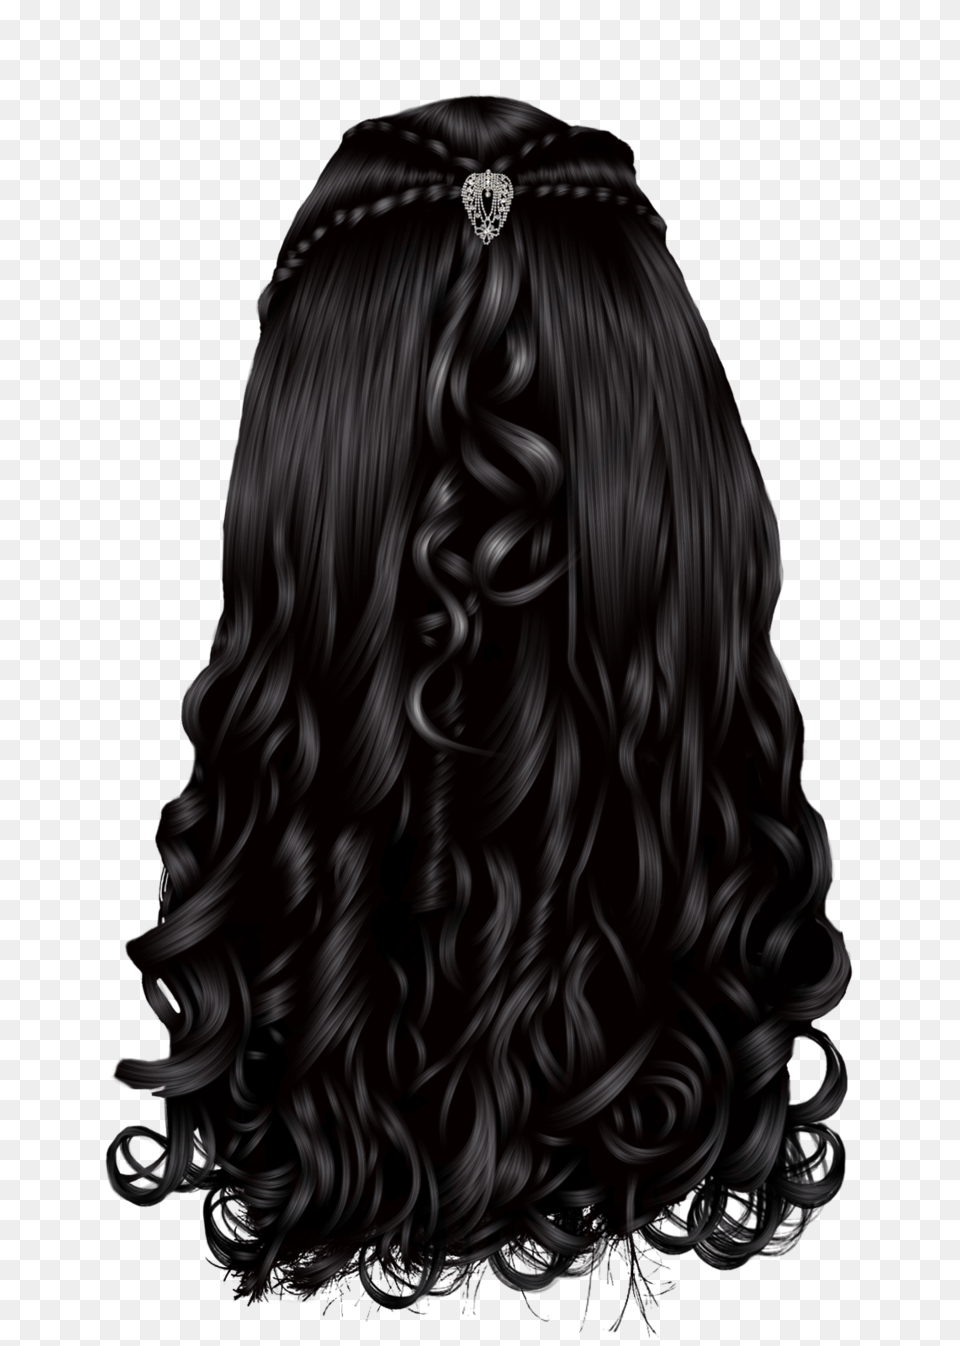 Hair Images Women And Men Hairs Images Download, Adult, Female, Person, Woman Png